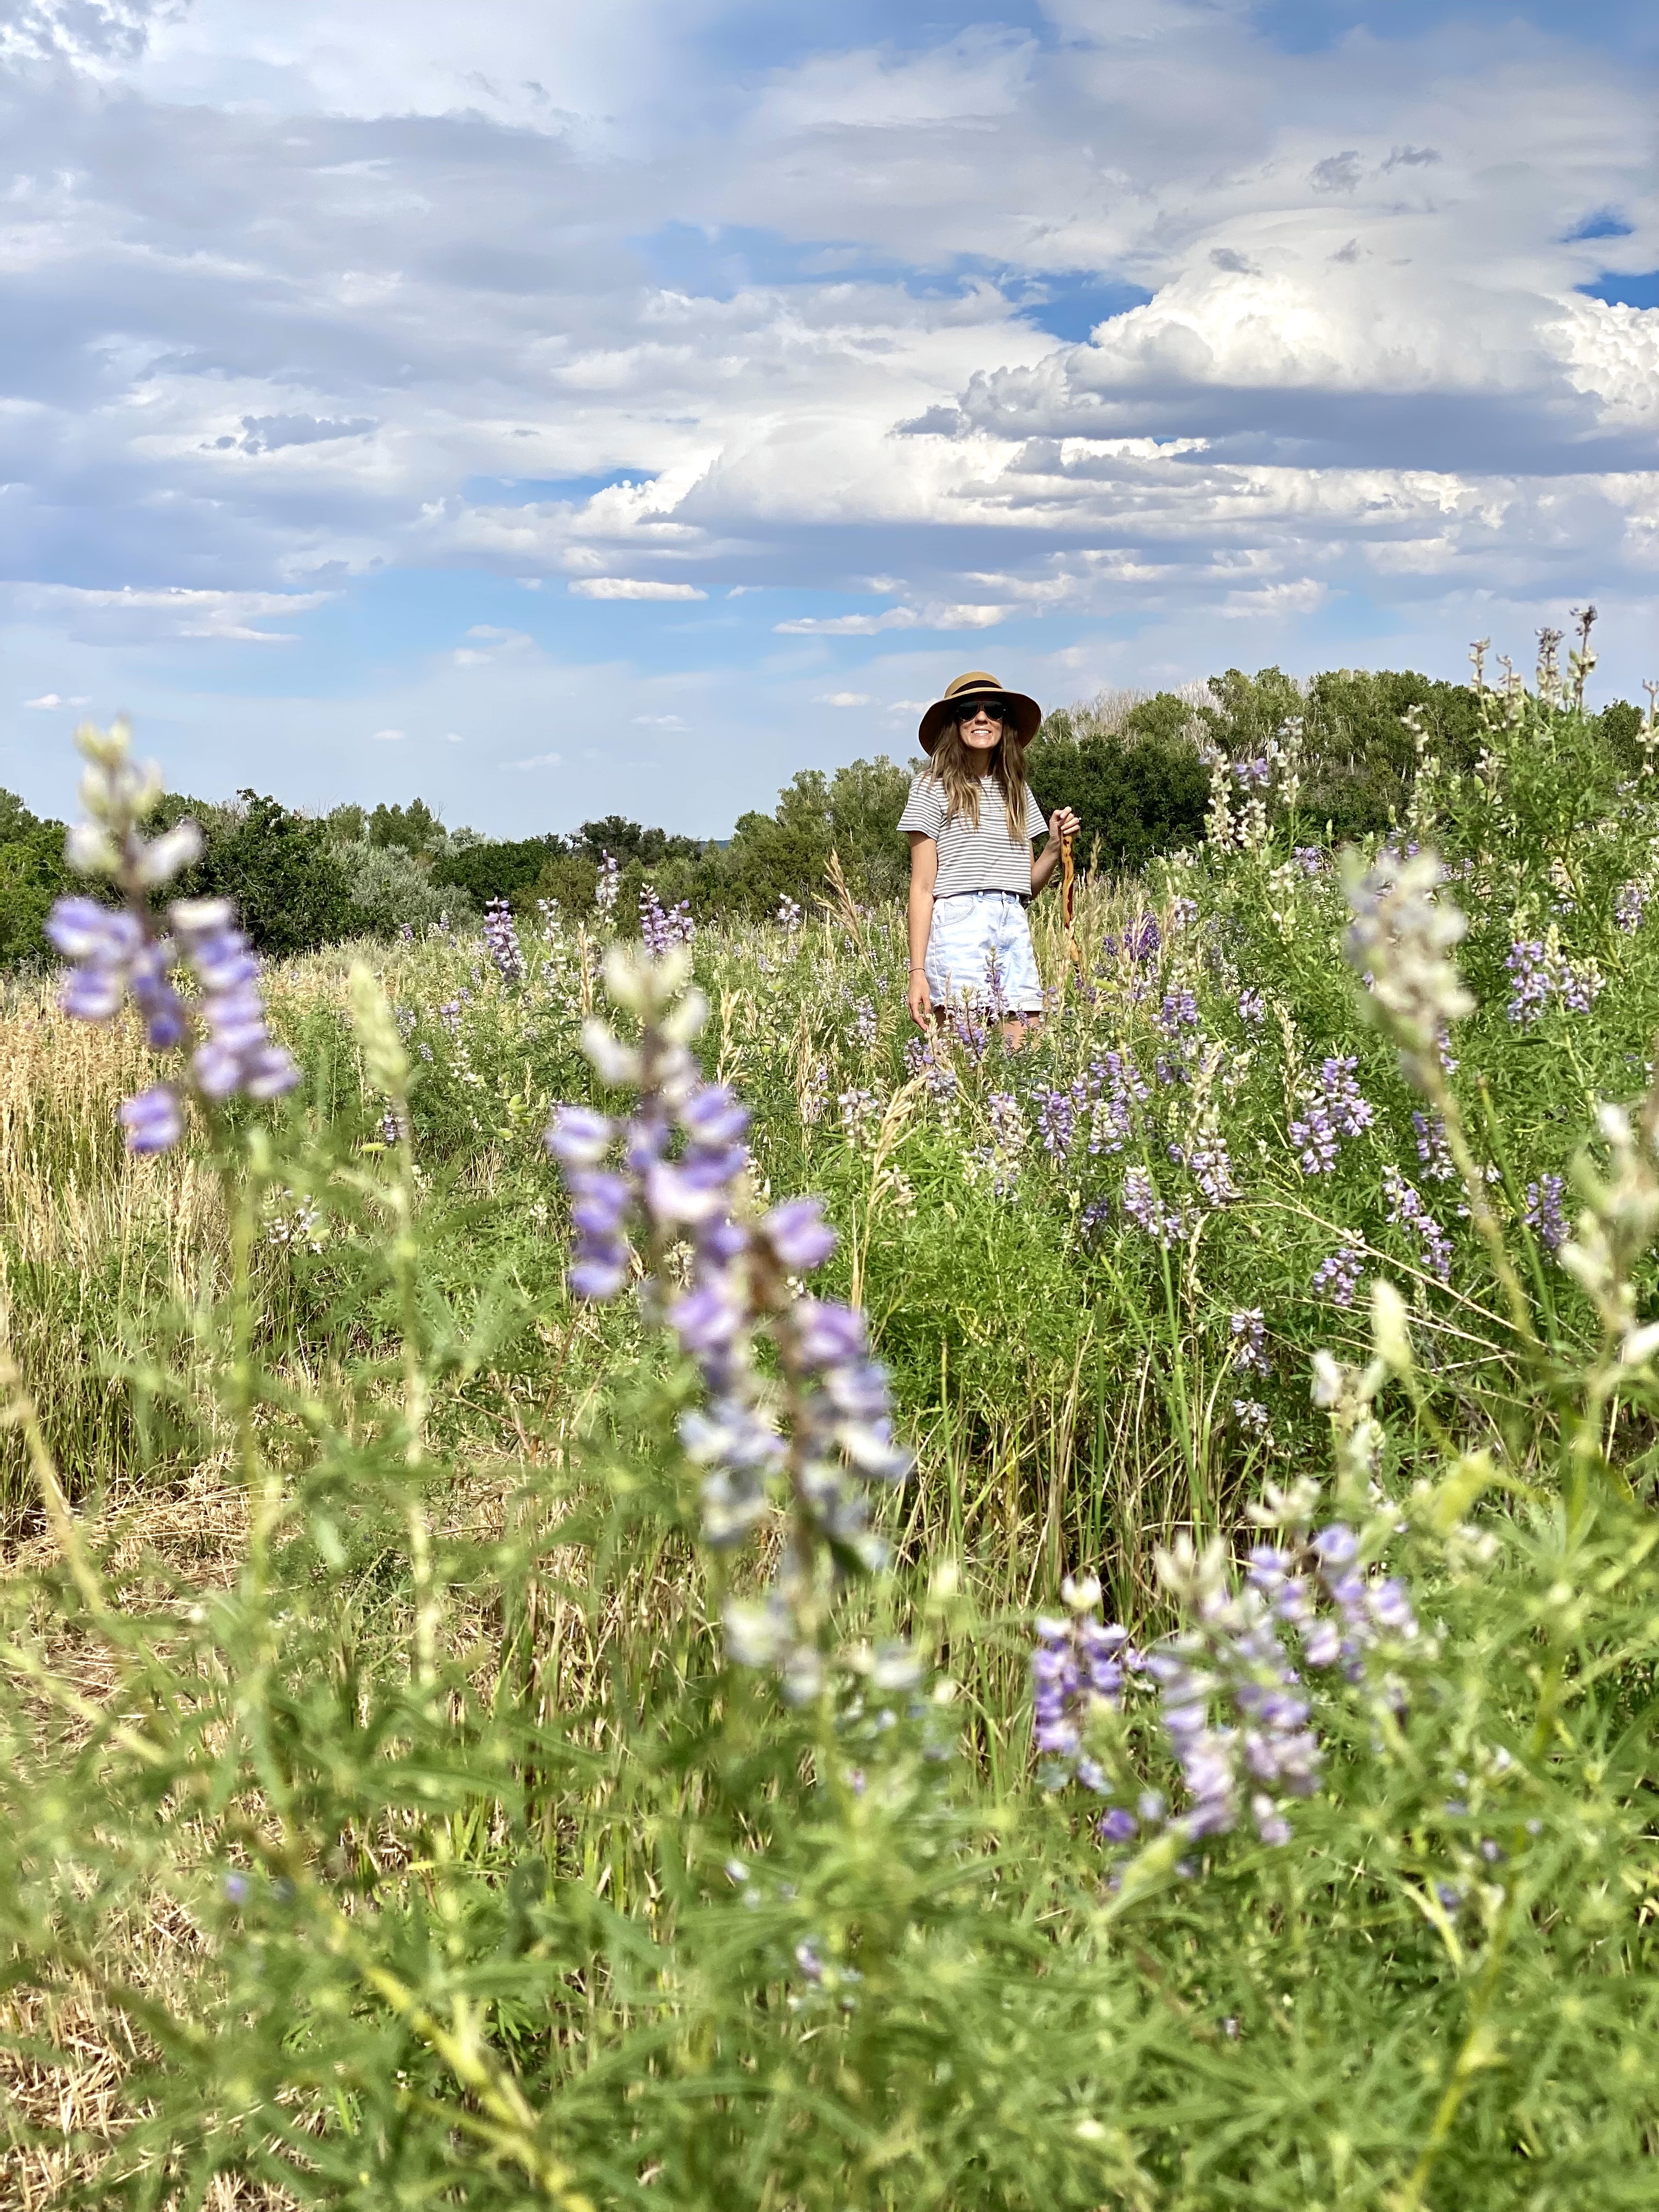 Caroline, in a striped shirt and jean shorts, walks in a flower filled field. the best outdoor activities to do around colorado springs. 